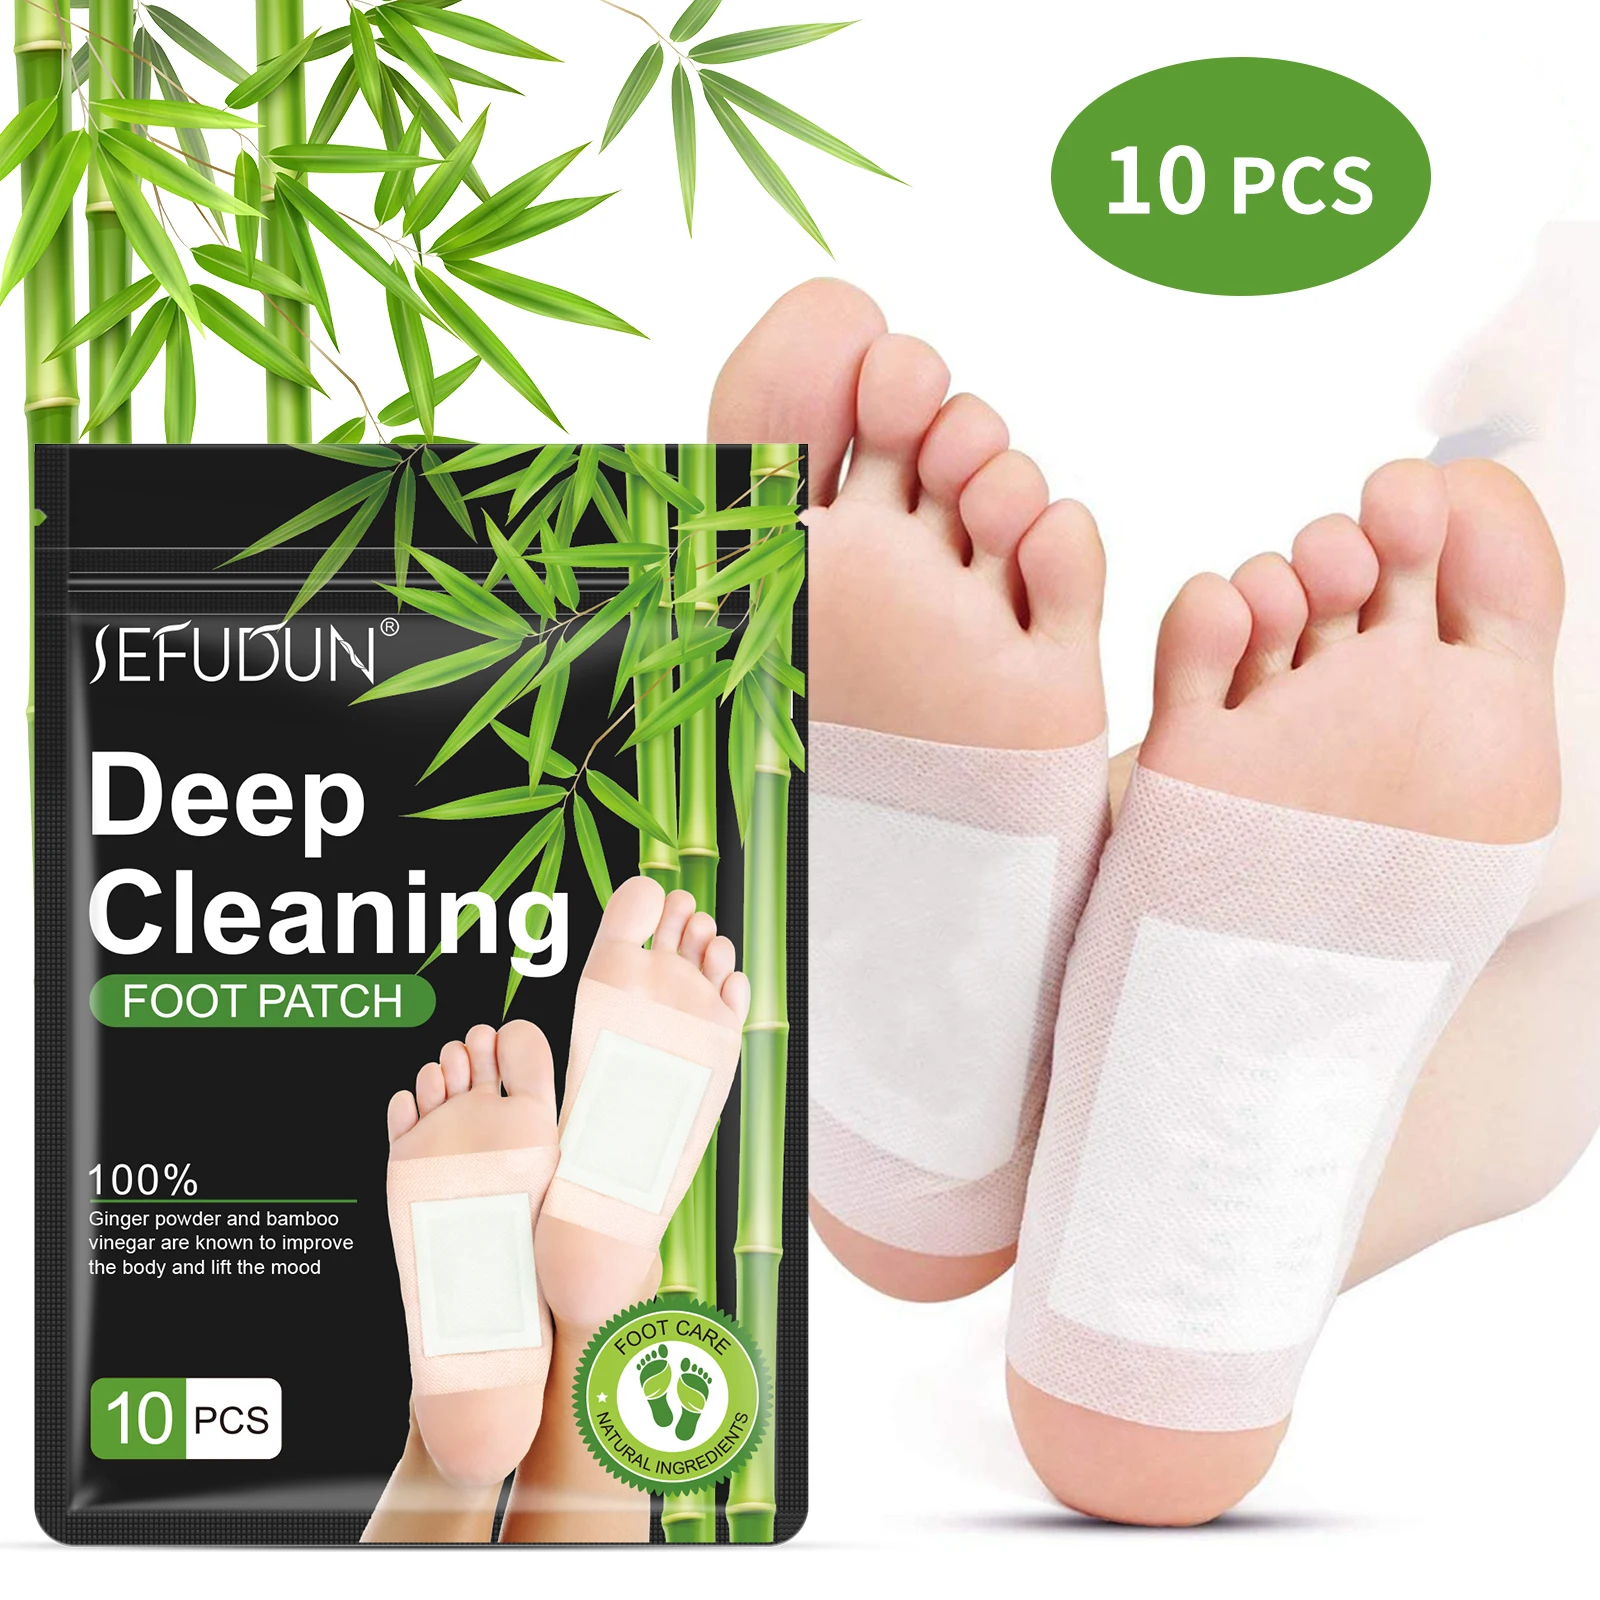 

OEM Natural Ginger Powder Bamboo Vinegar Detox Foot Pads Deep Cleansing Foot Patches Improve Sleeping Moisturize Feet Patch